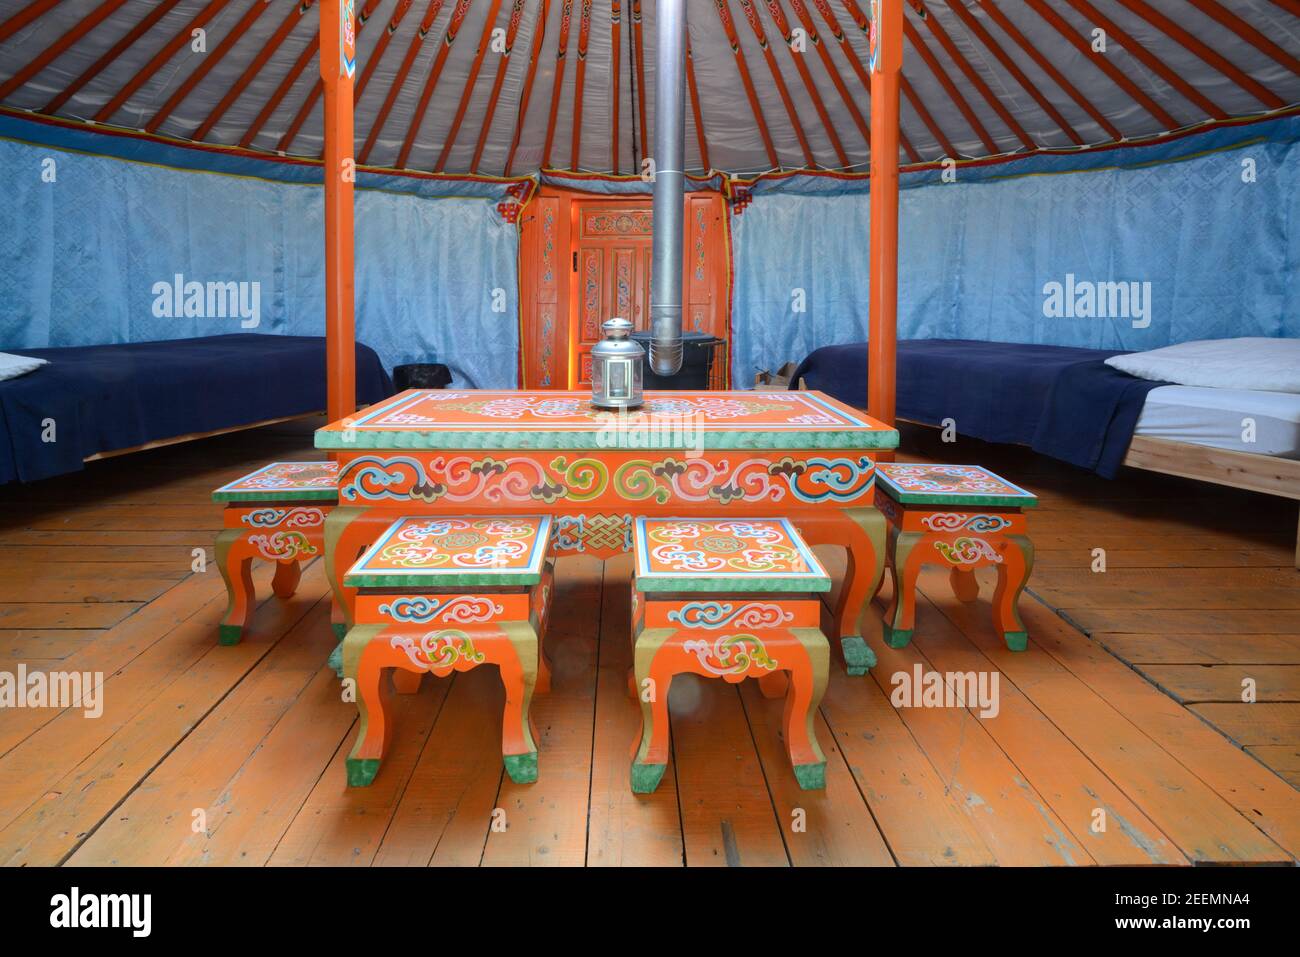 Interior of a Mongolian Yurt or Ger with Painted Furniture including low Table & Chairs or Stools & Wood Burning Stove Stock Photo